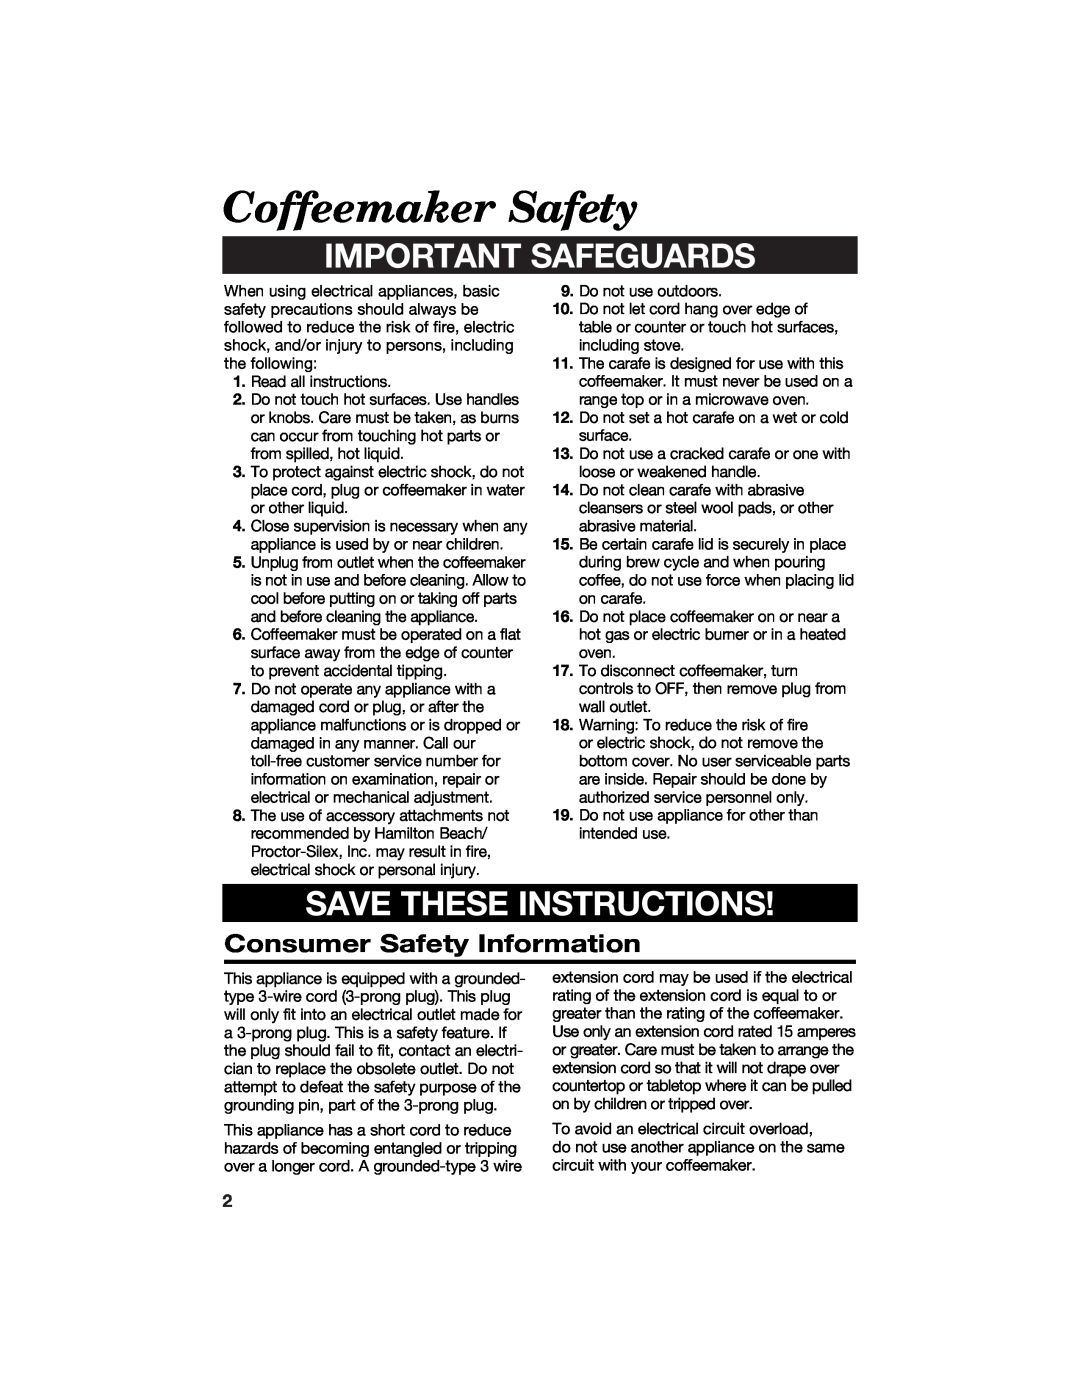 Hamilton Beach 840073500 Coffeemaker Safety, Consumer Safety Information, Important Safeguards, Save These Instructions 